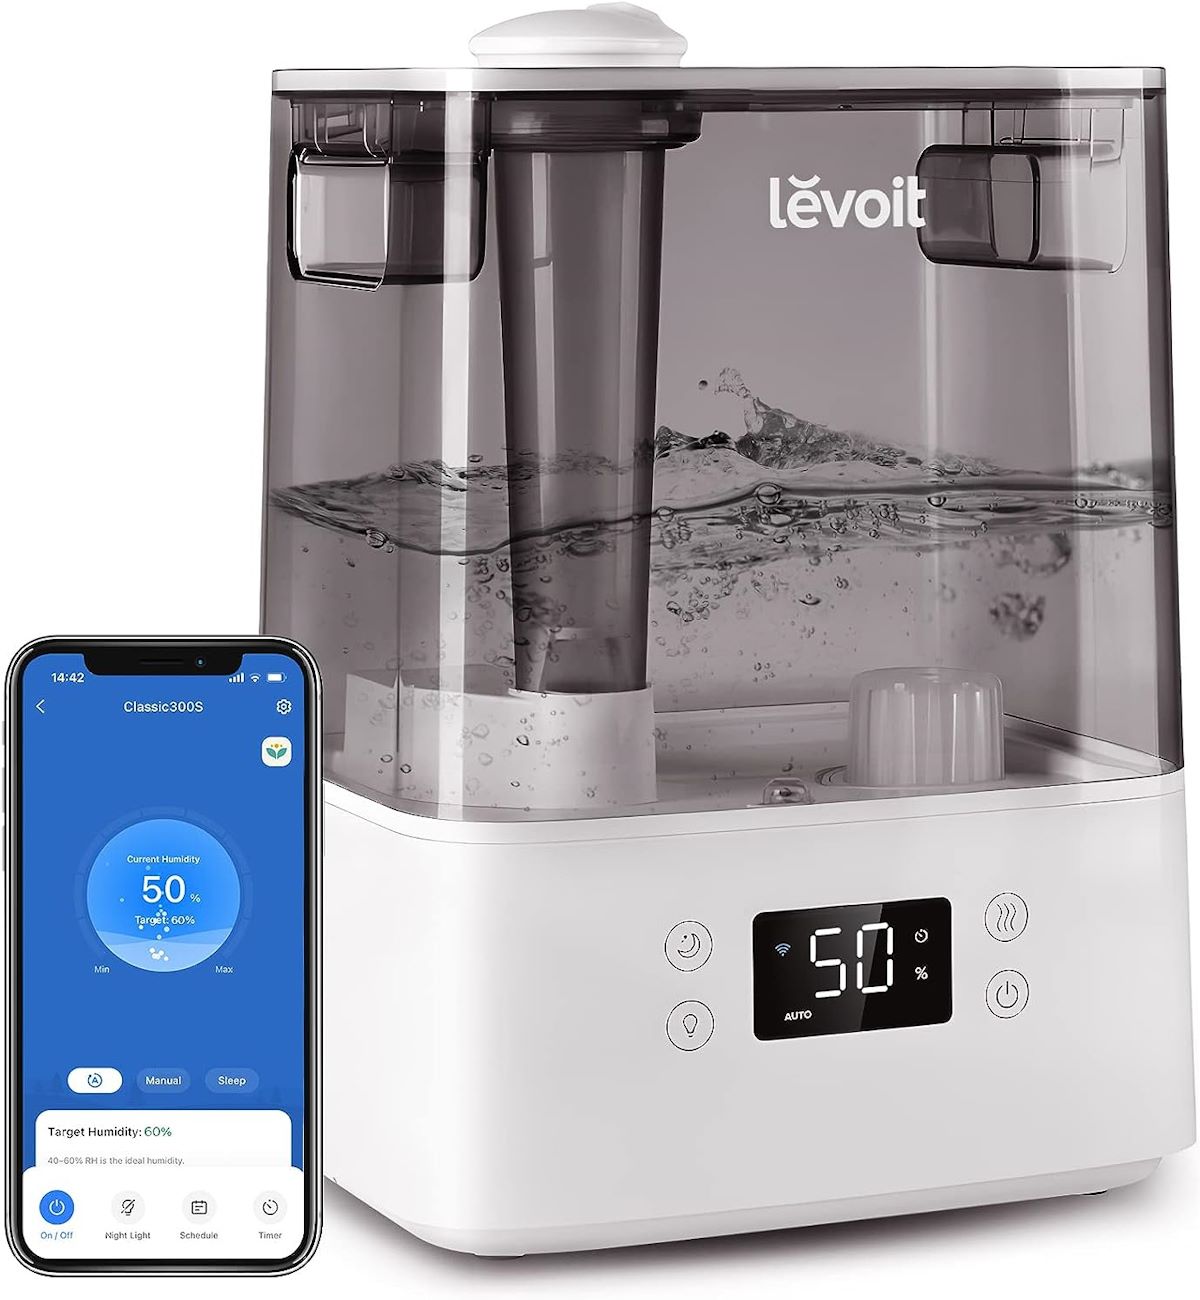 Levoit brand smart humidifier in white, controlled by an app on your phone.